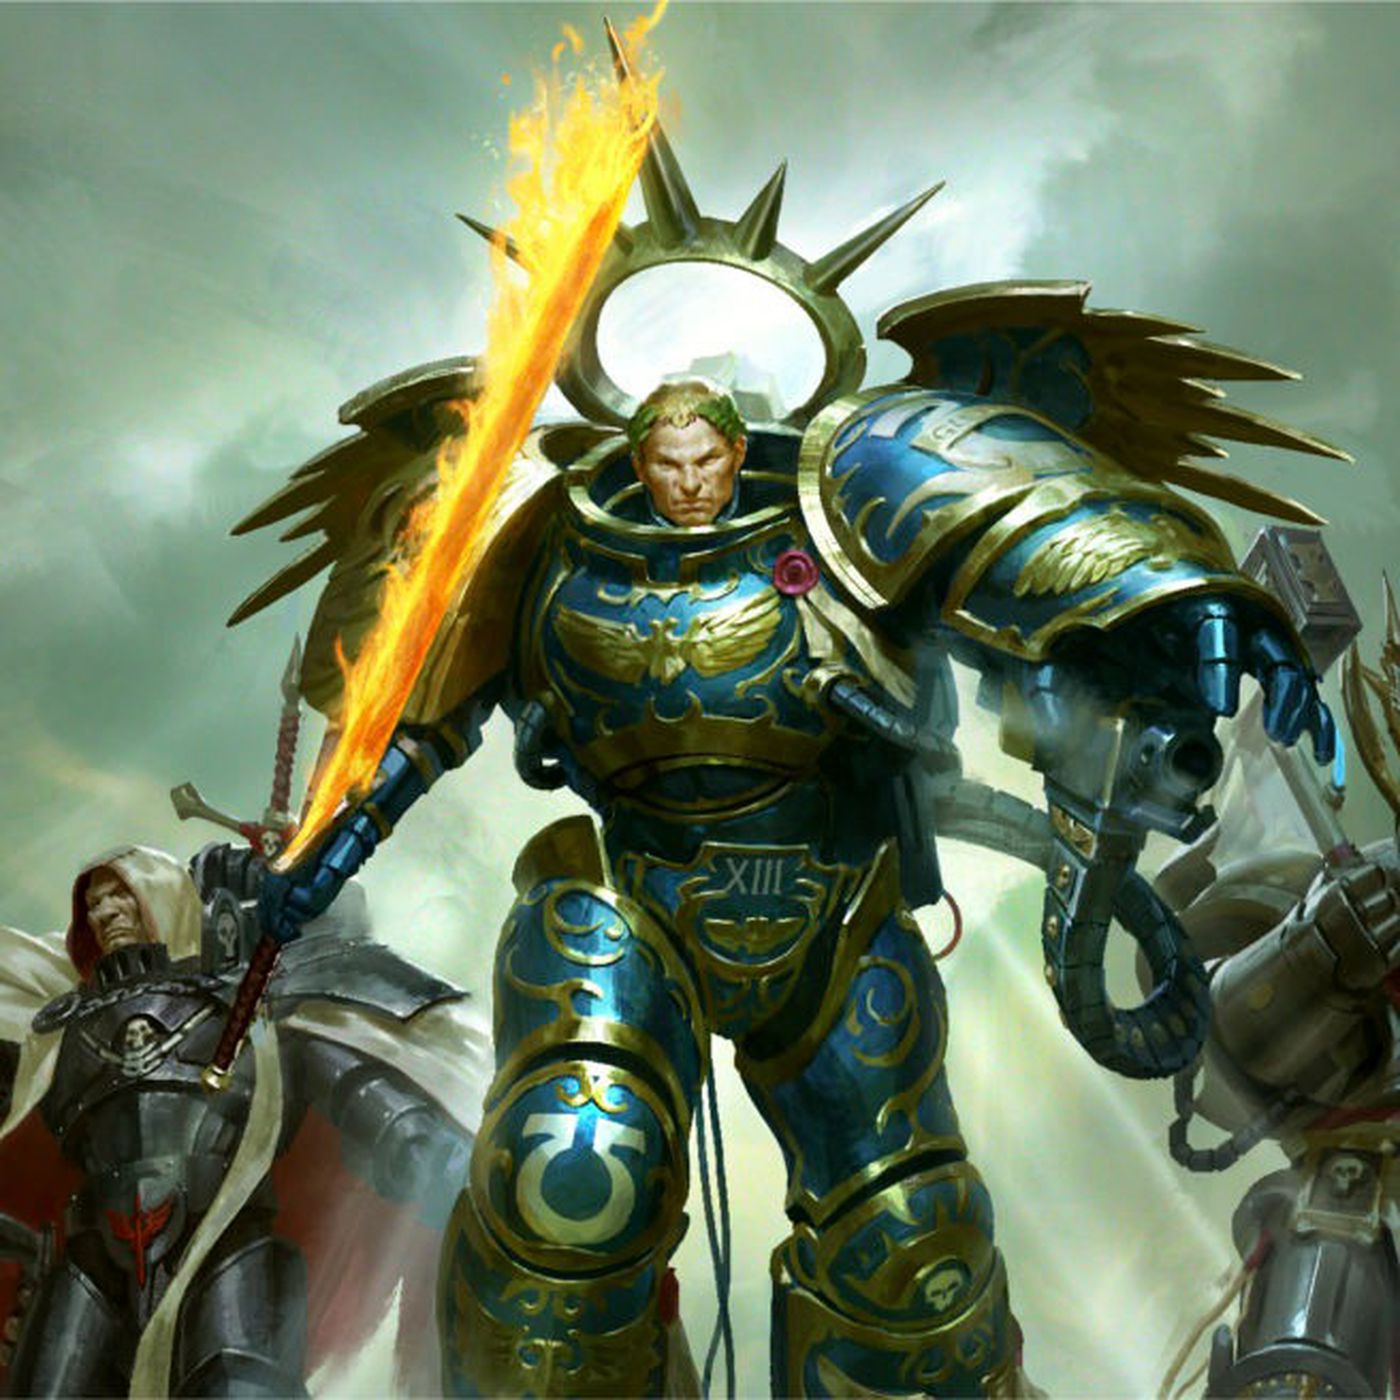 Warhammer 40k Characters: Beings of Myth and Legend